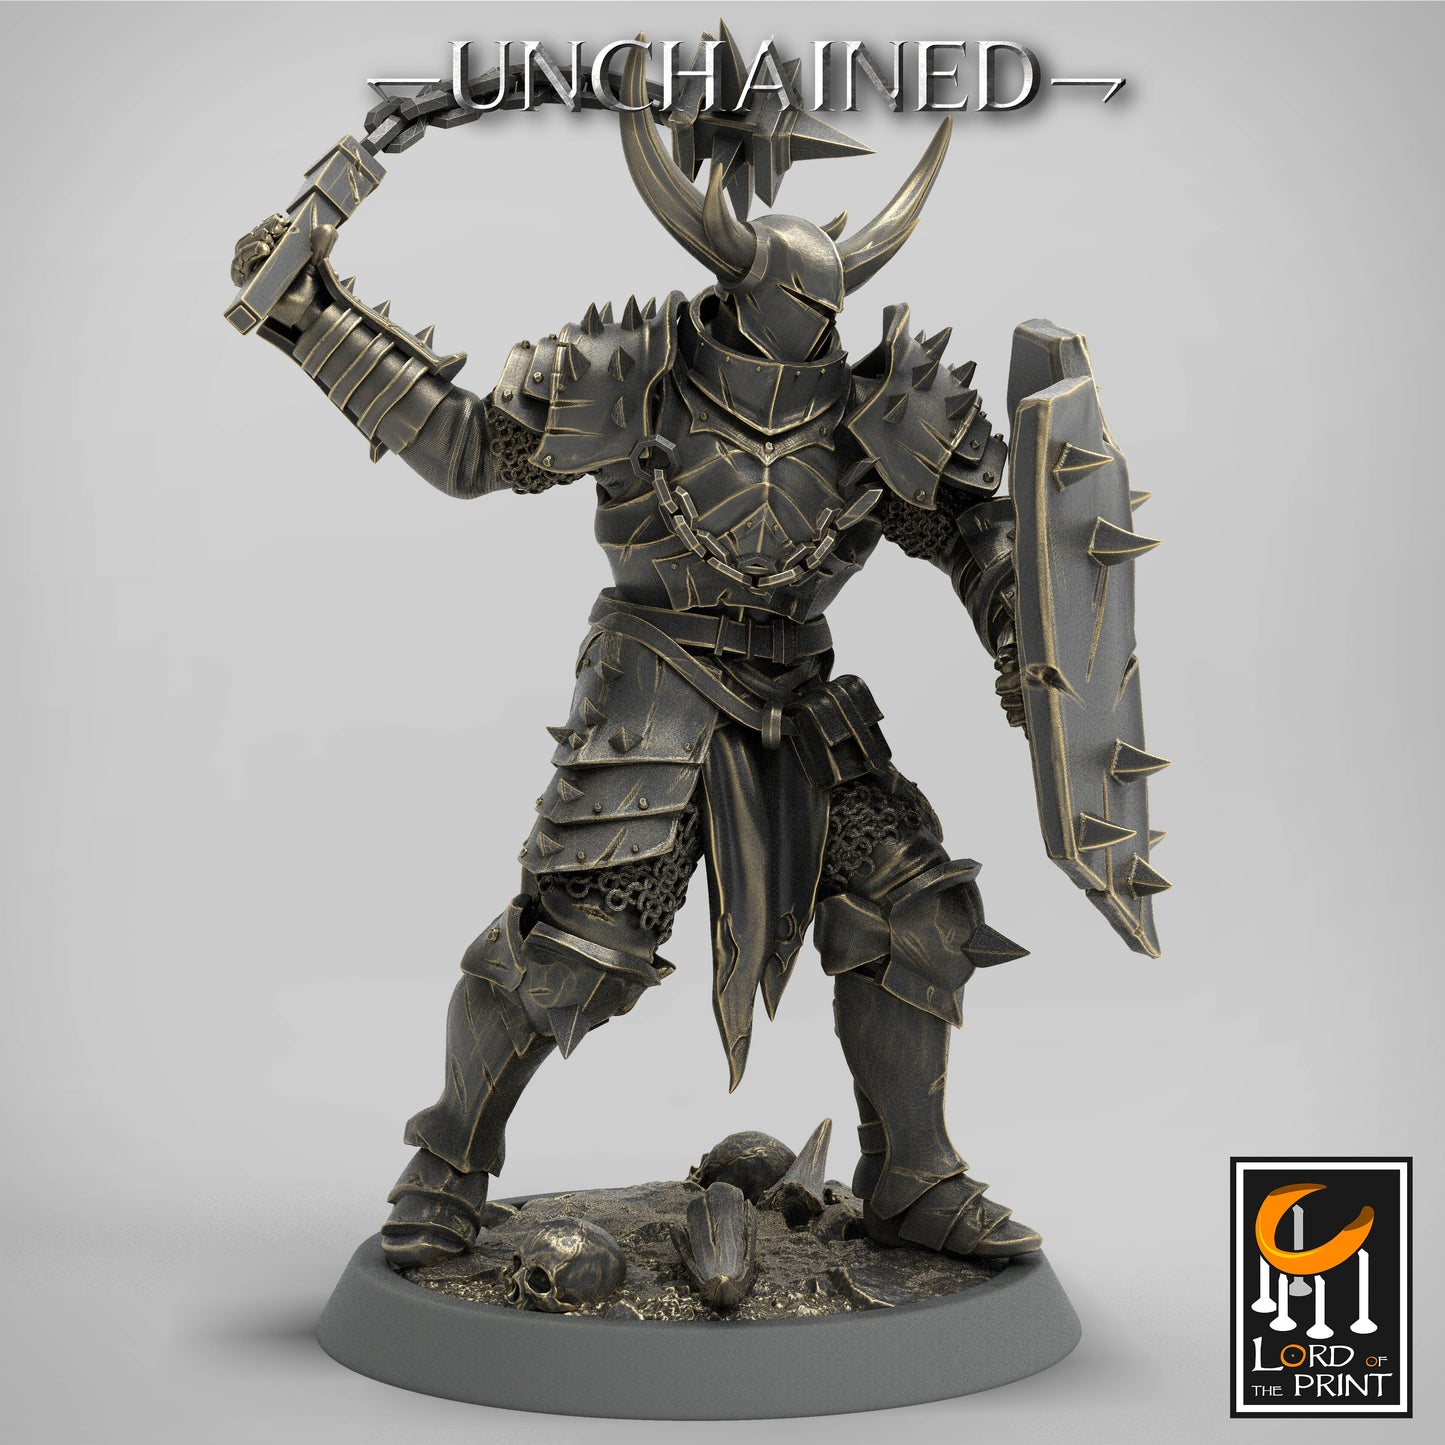 Light Soldiers - Flail Attack - UNCHAINED ARMY